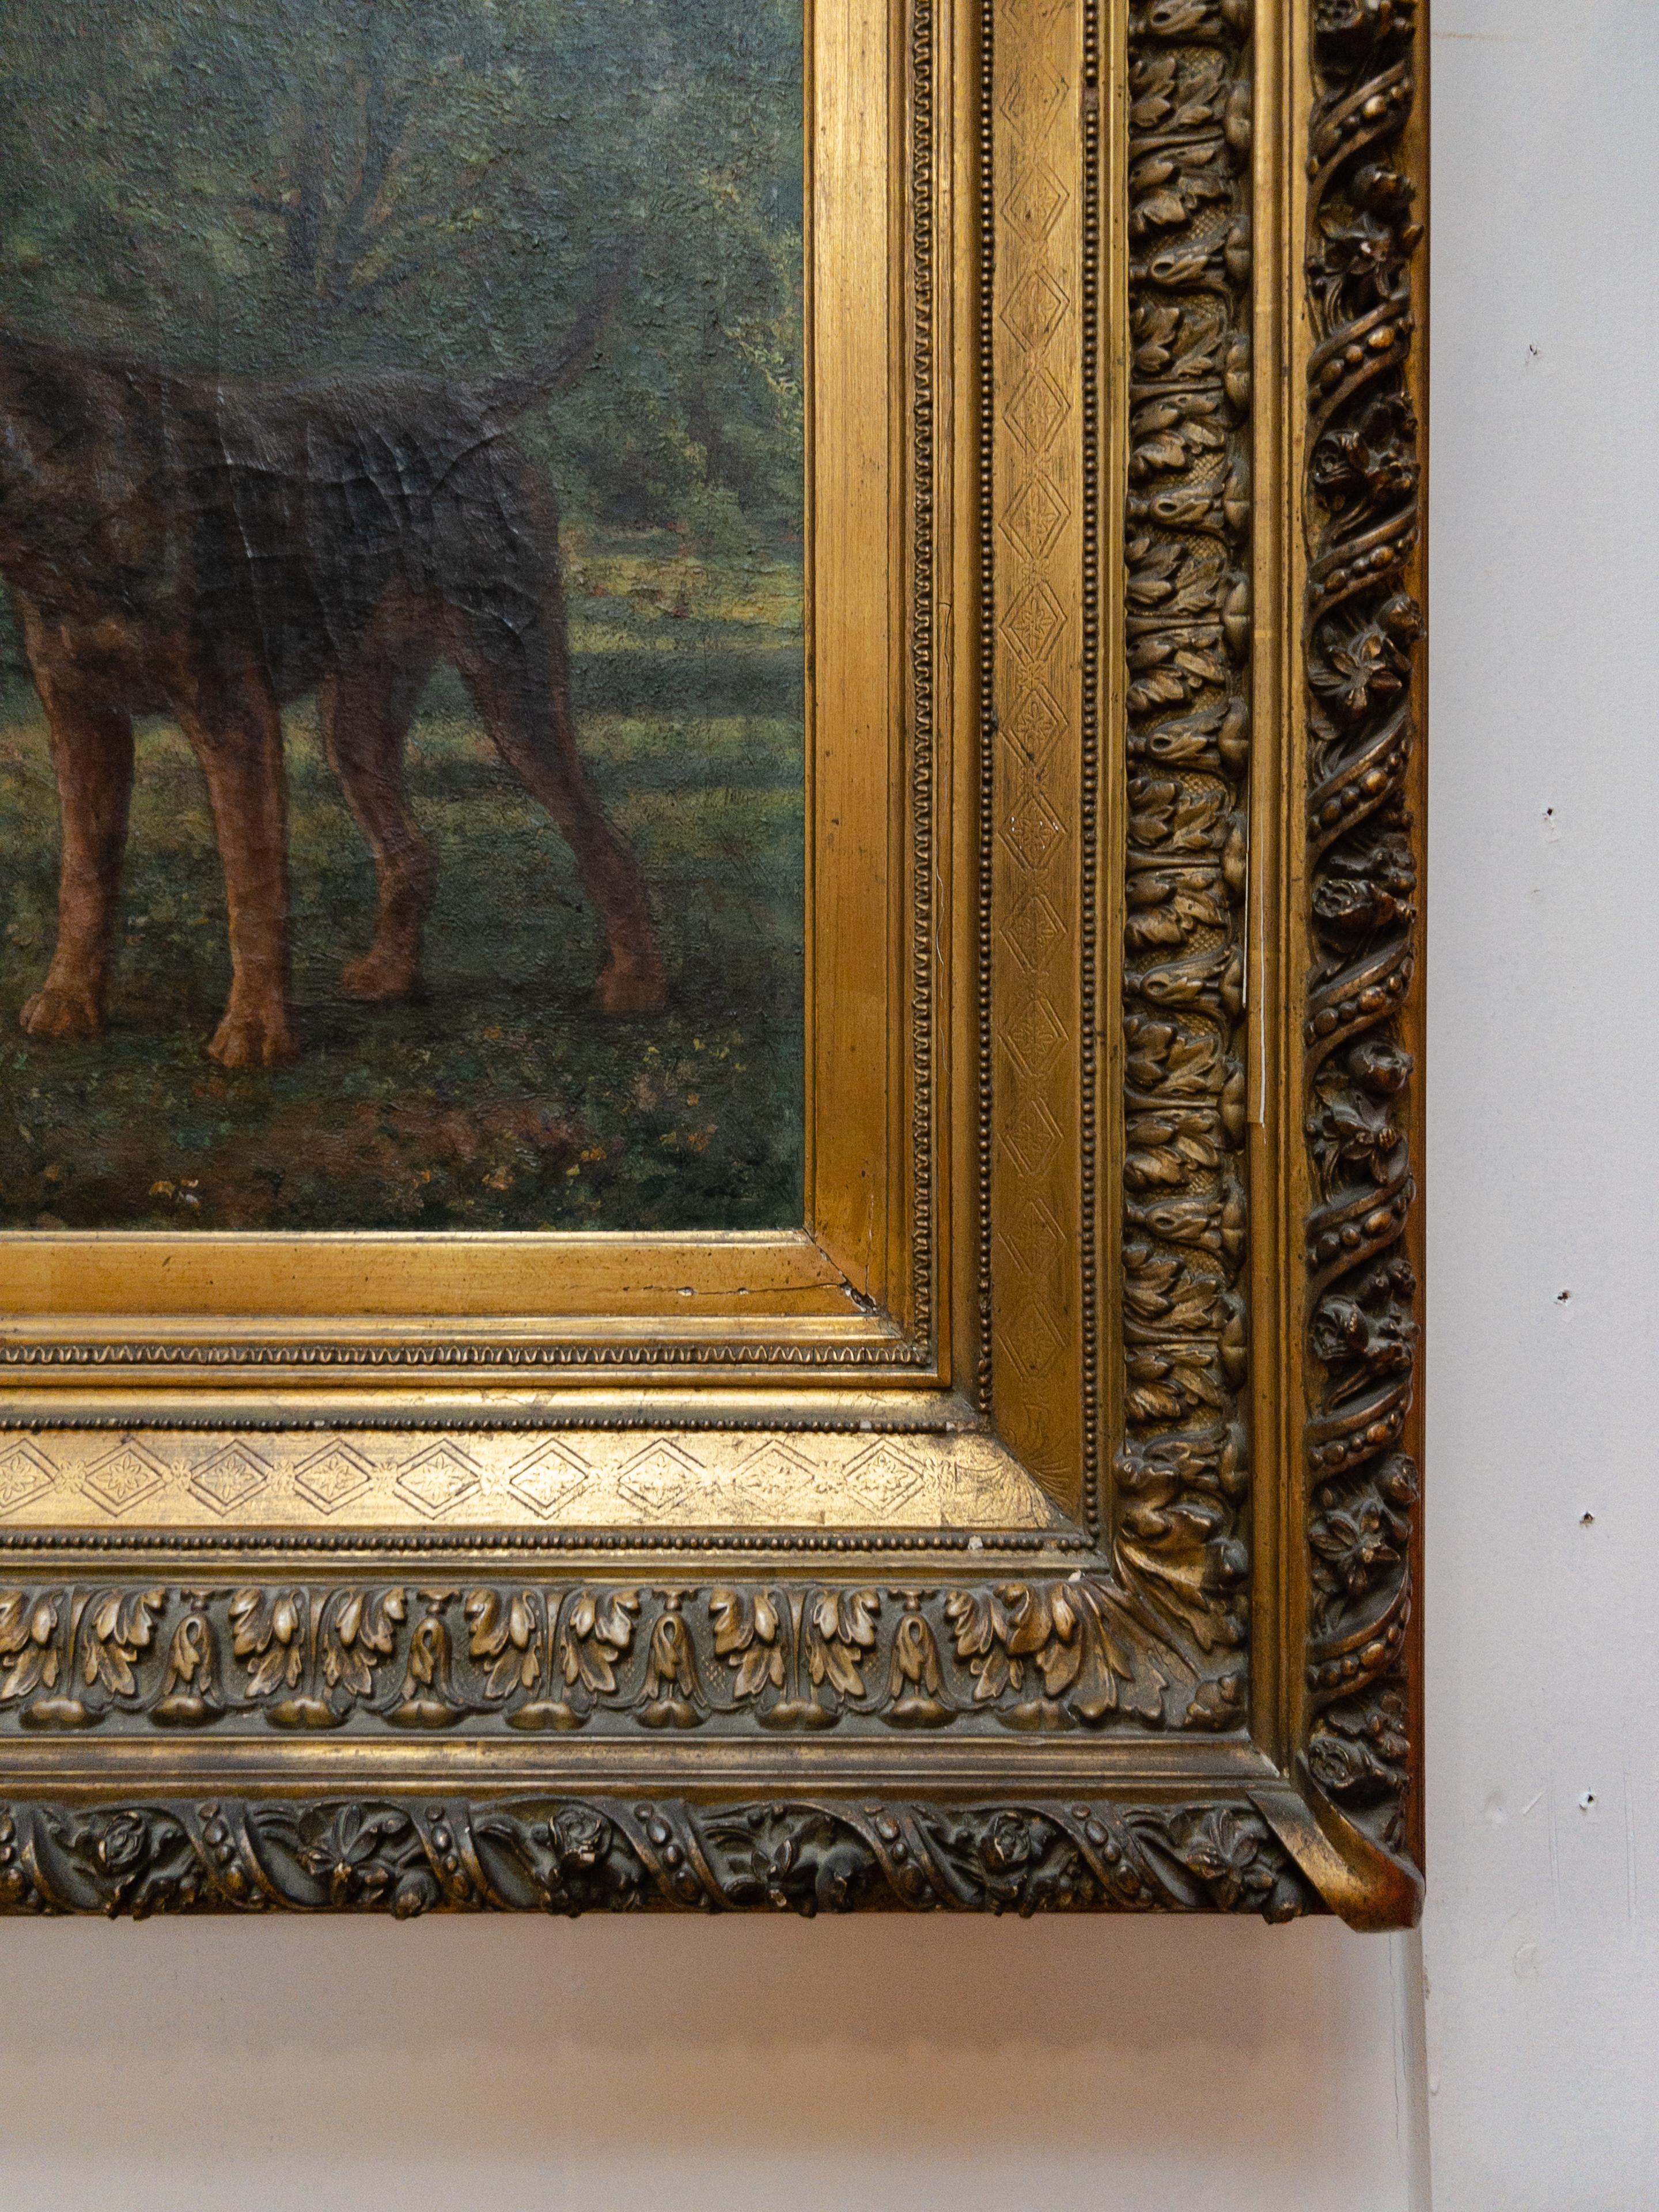 19th century oil on canvas painting of dogs in gilt frame by Charles Boland.